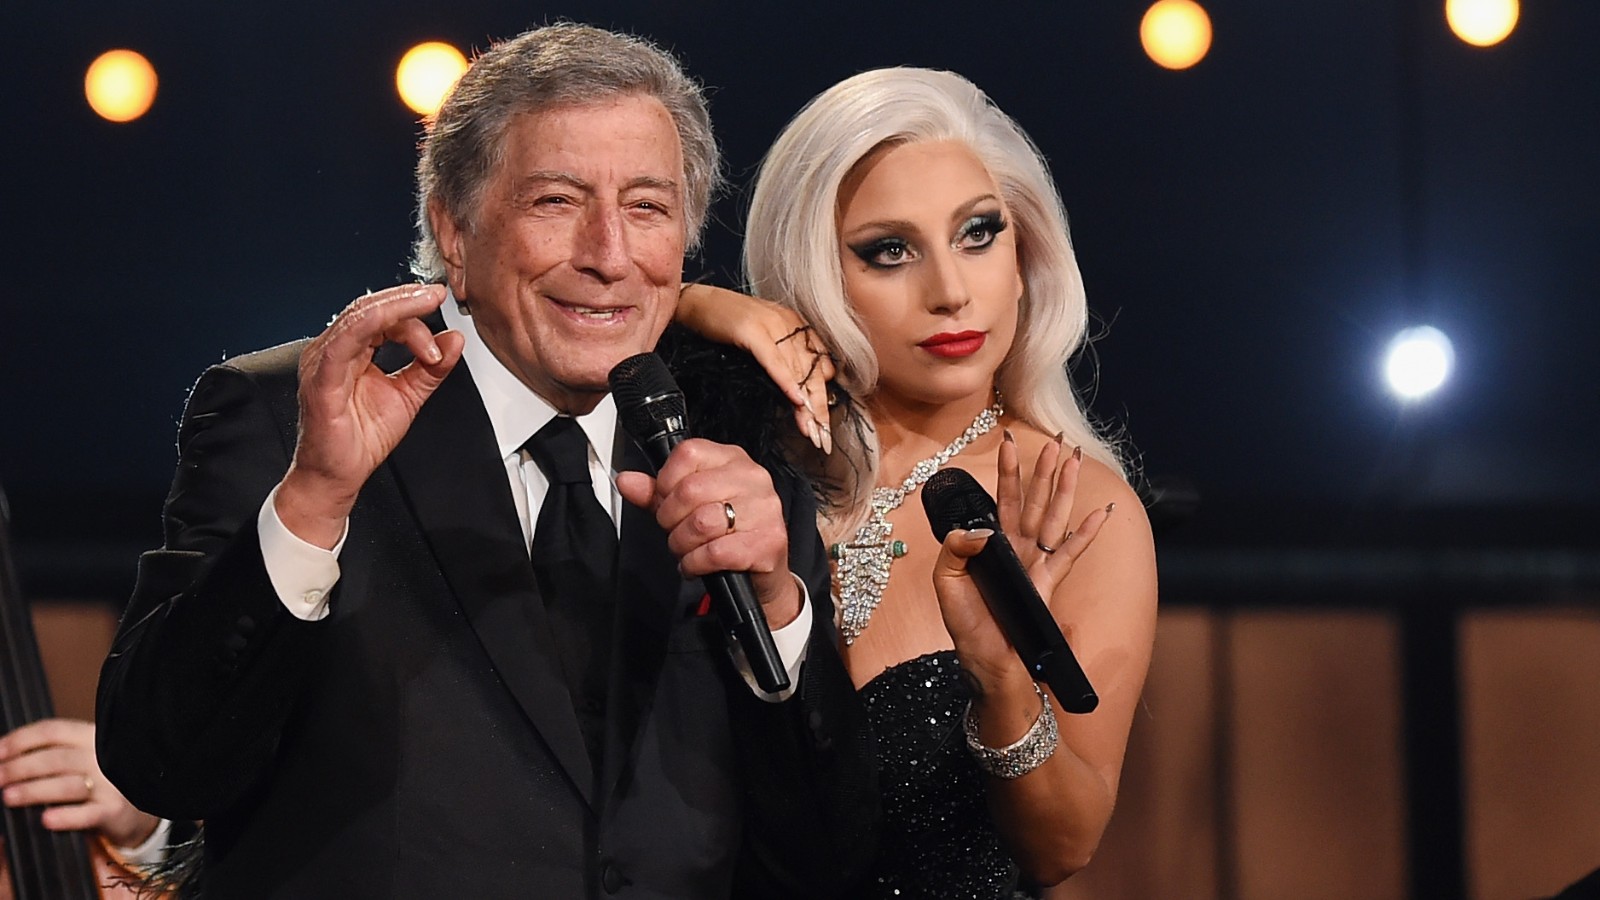 Tony Bennett and Lady Gaga's newest collaboration to debut this fall